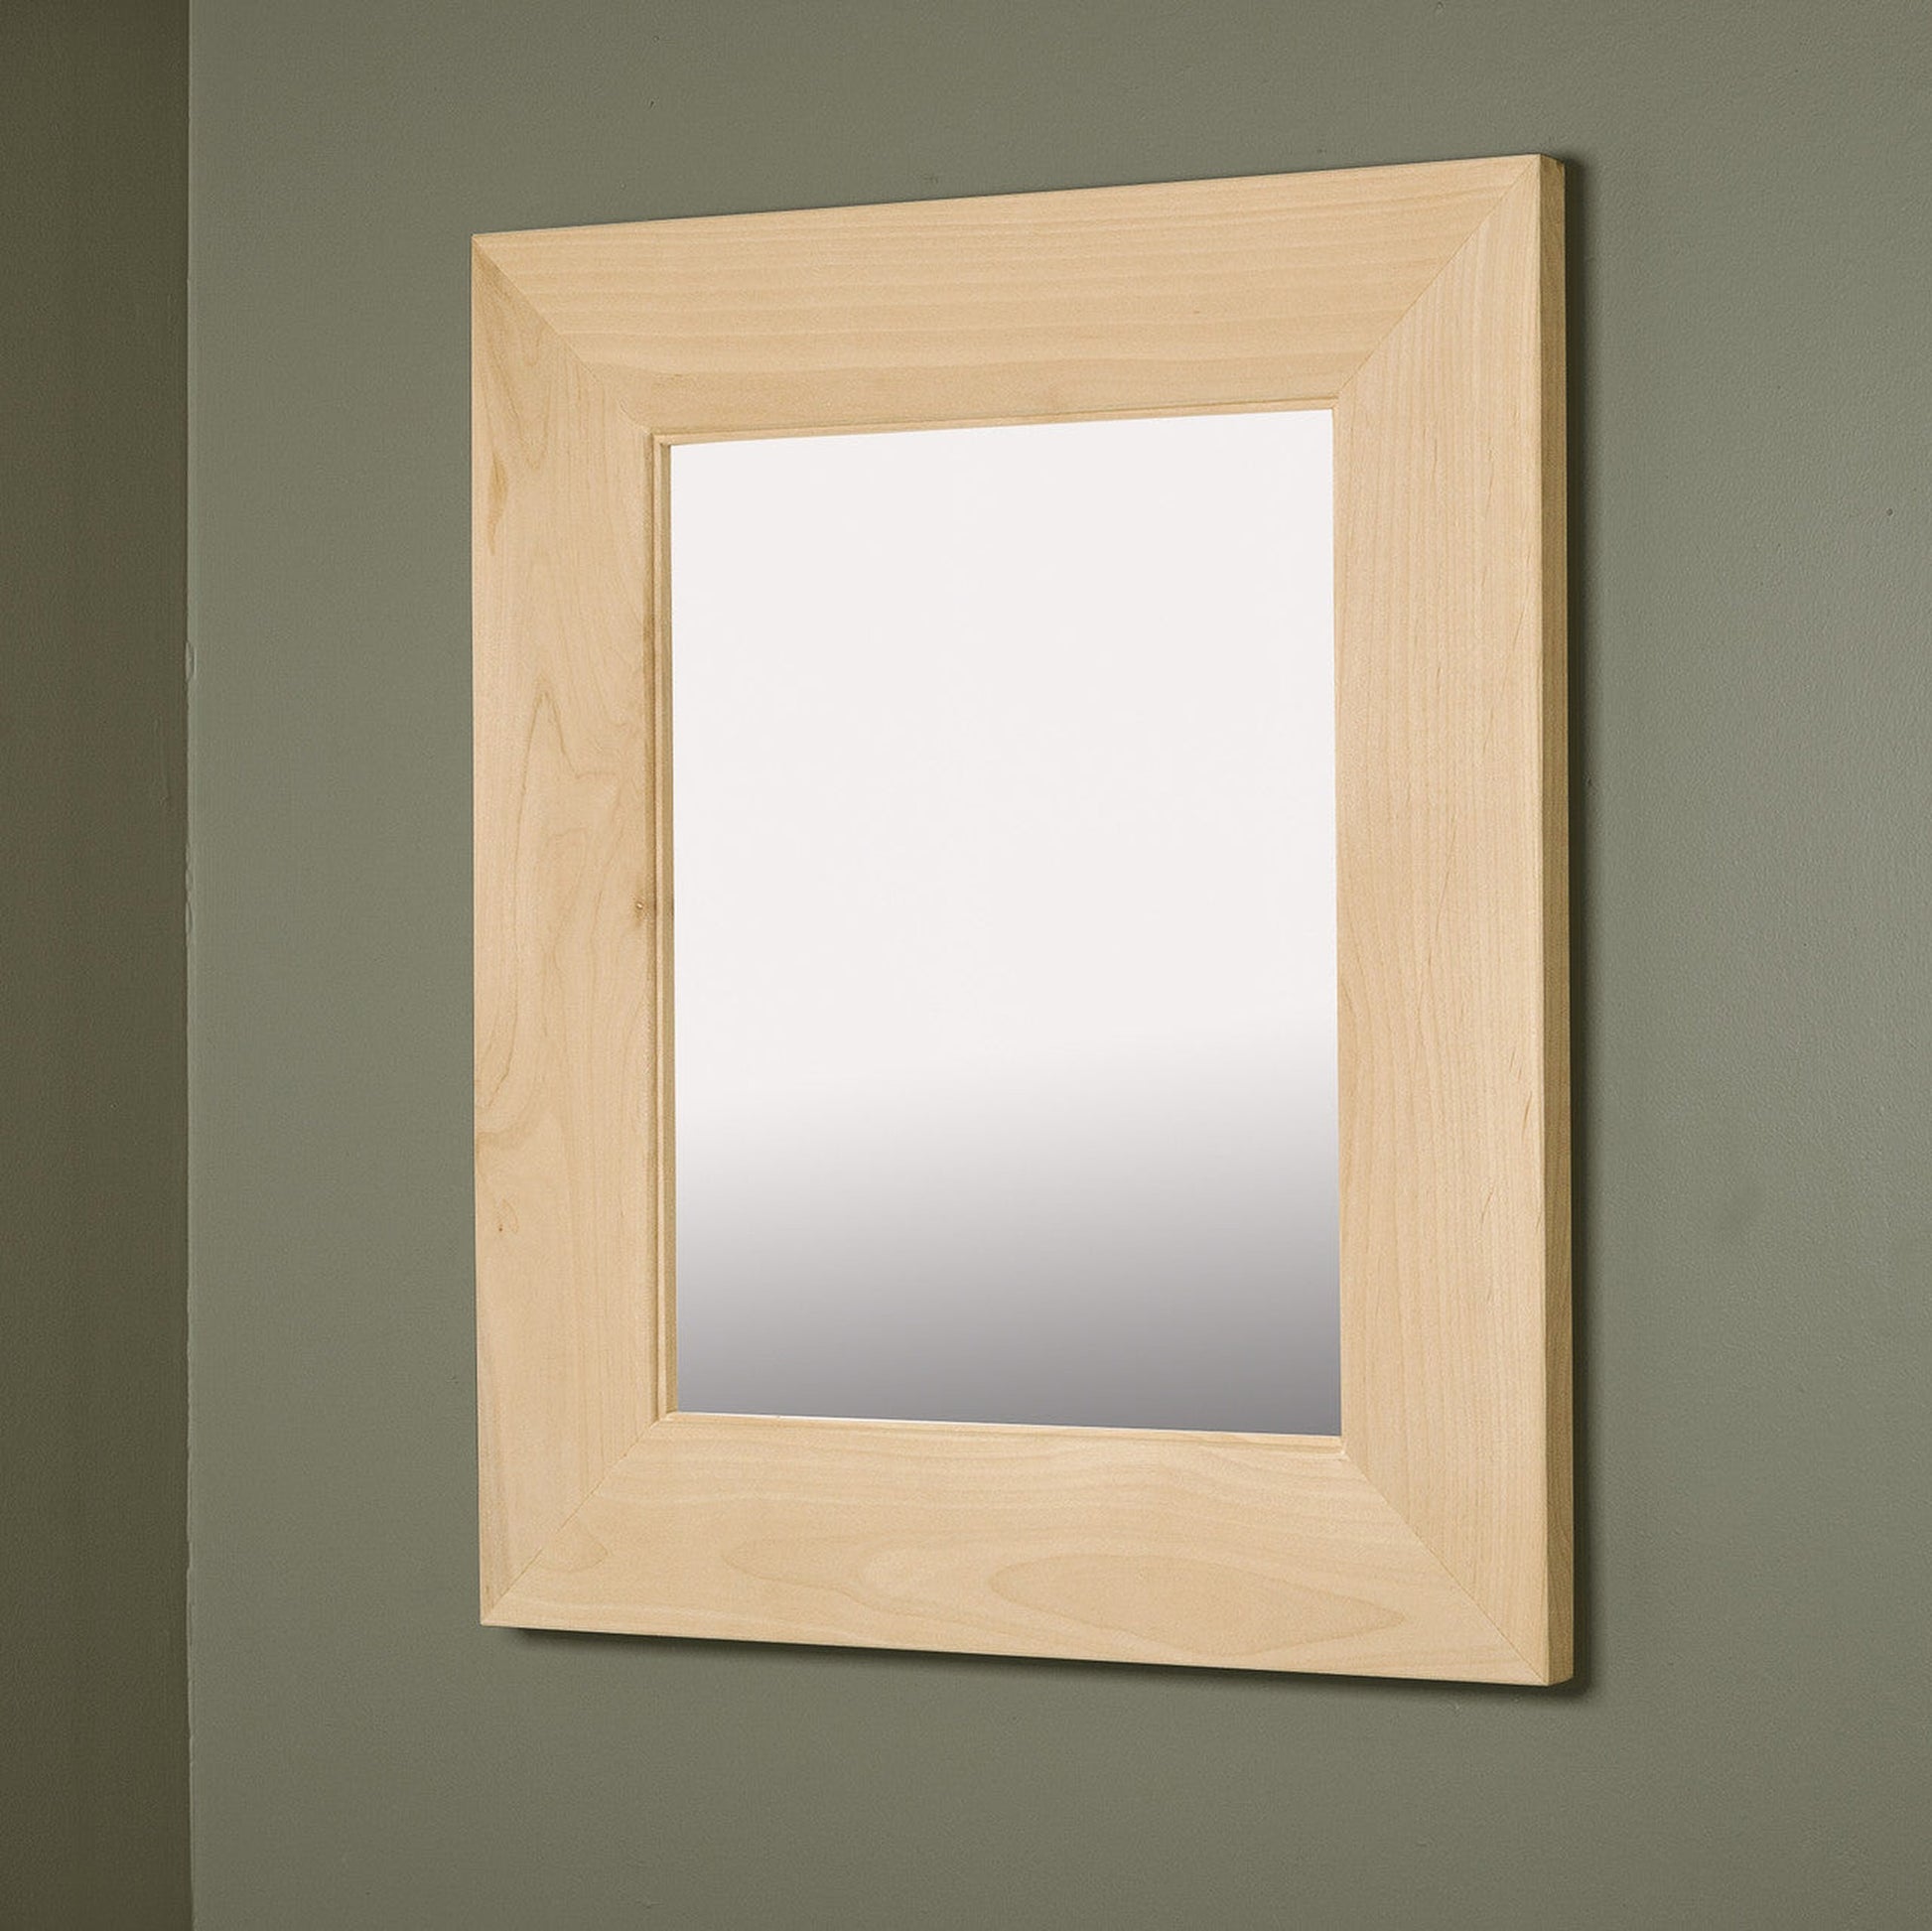 Fox Hollow Furnishings 14" x 18" Unfinished Flat Edge Special 3" Depth White Interior Mirrored Medicine Cabinet